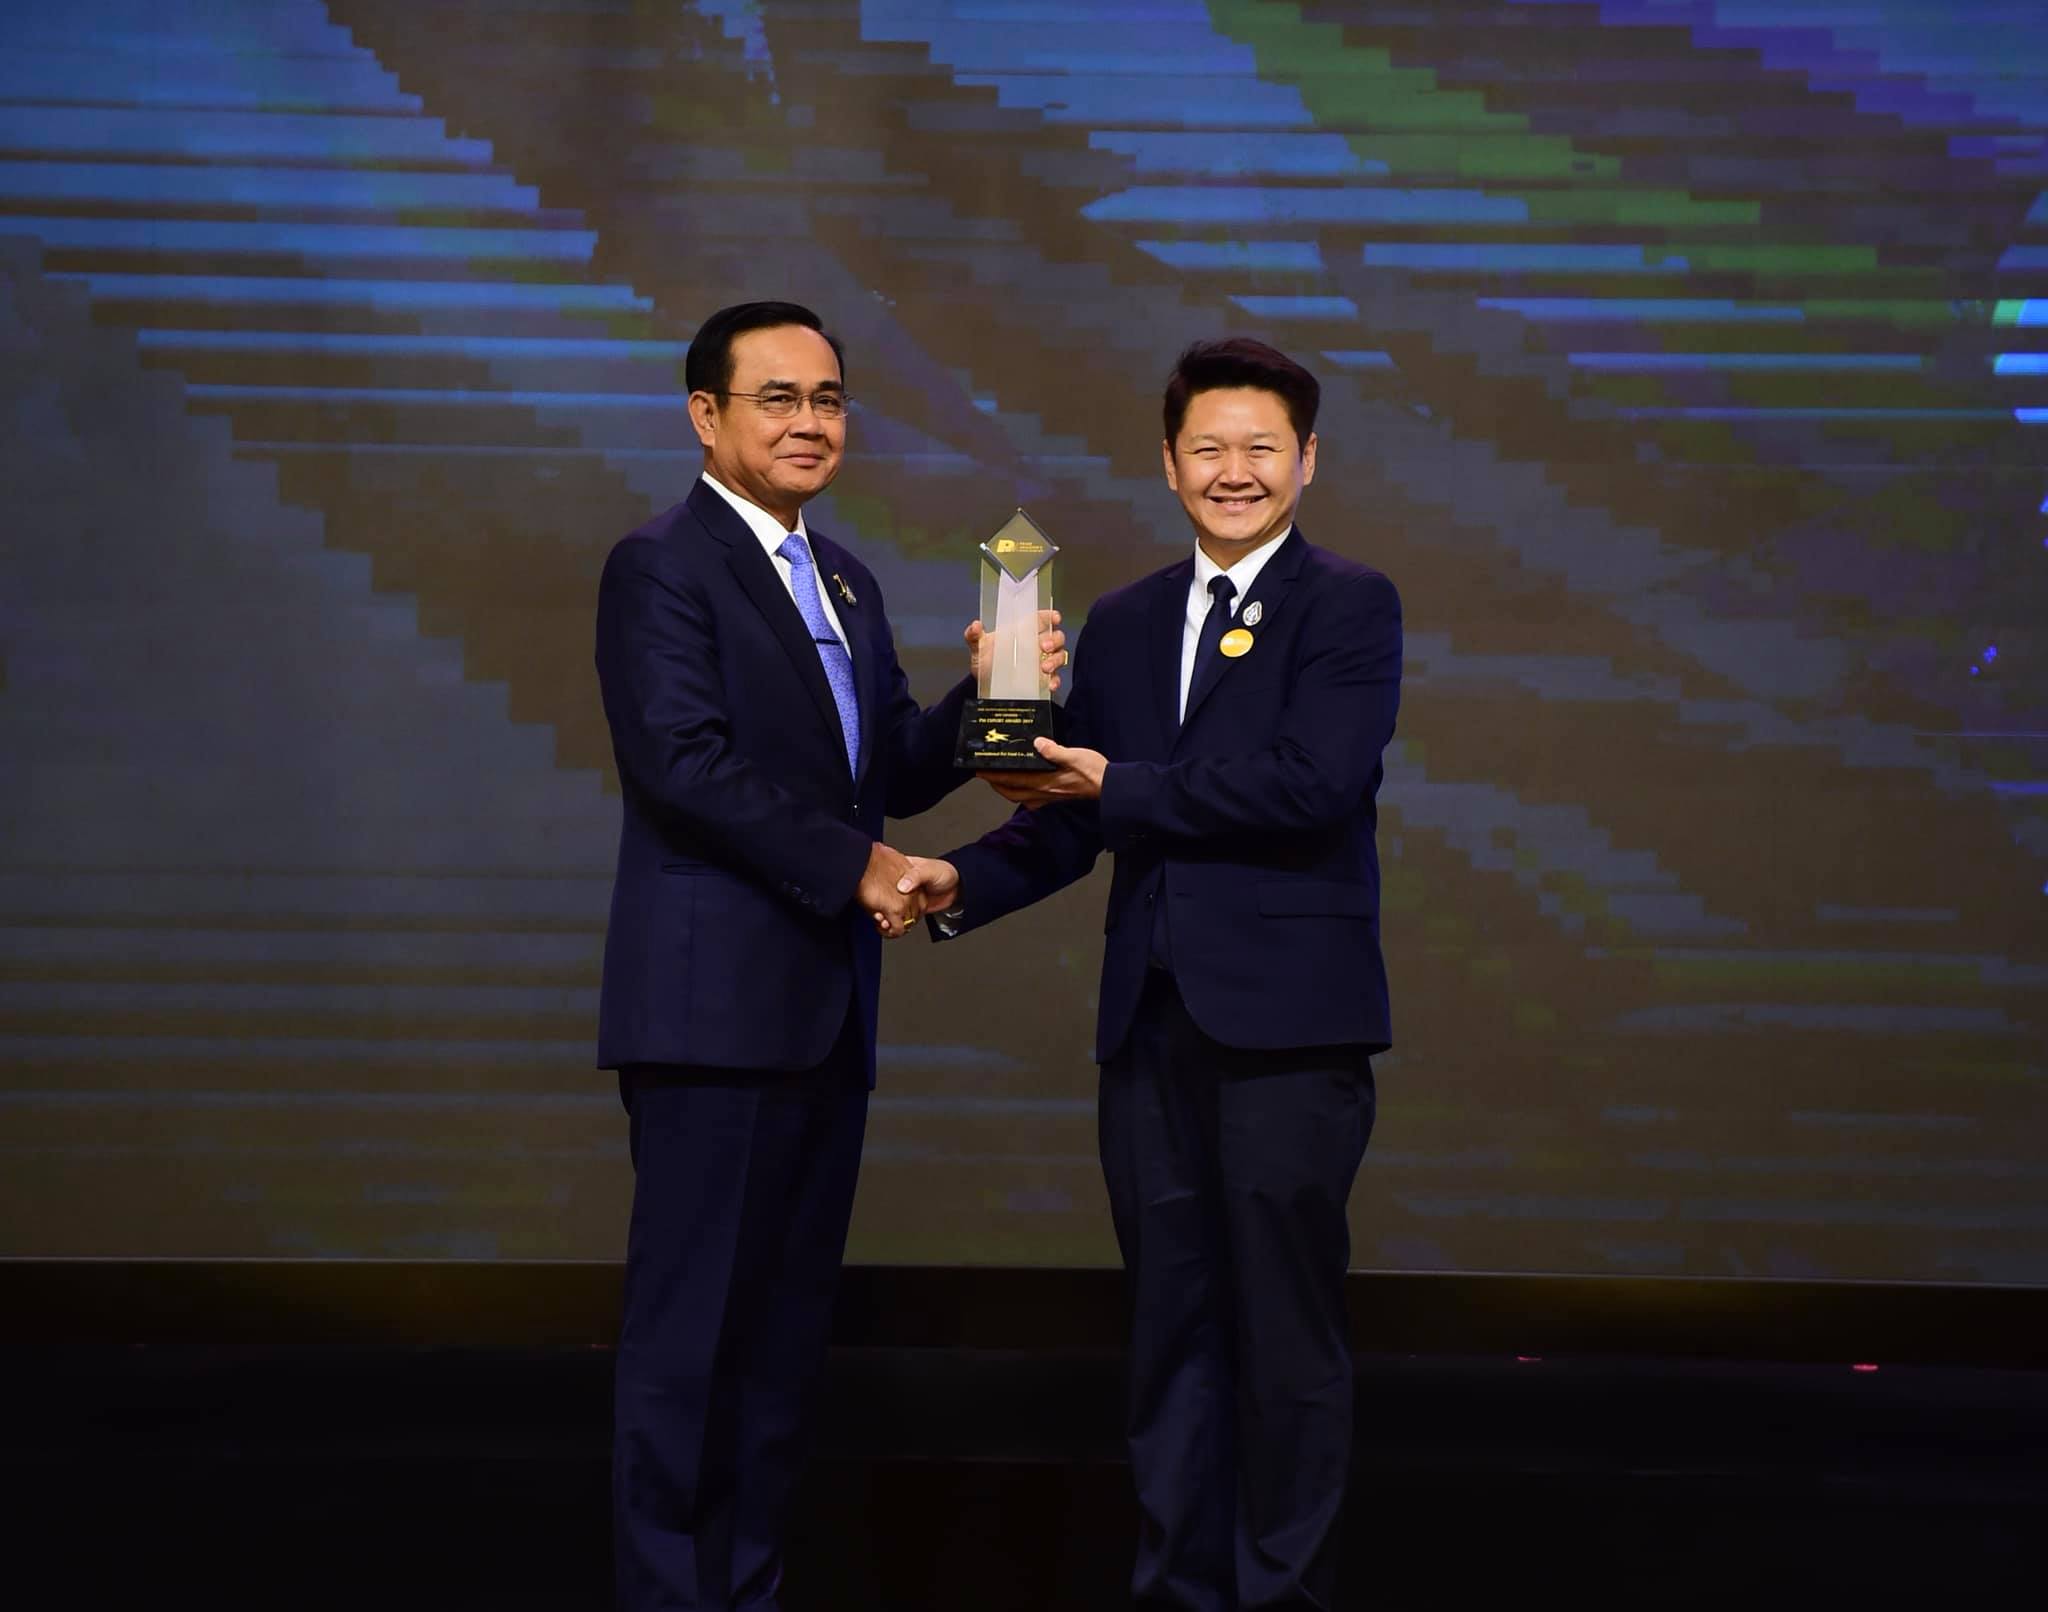 CP Foods’ subsidiary wins its third Prime Minister’s Export Award 2019